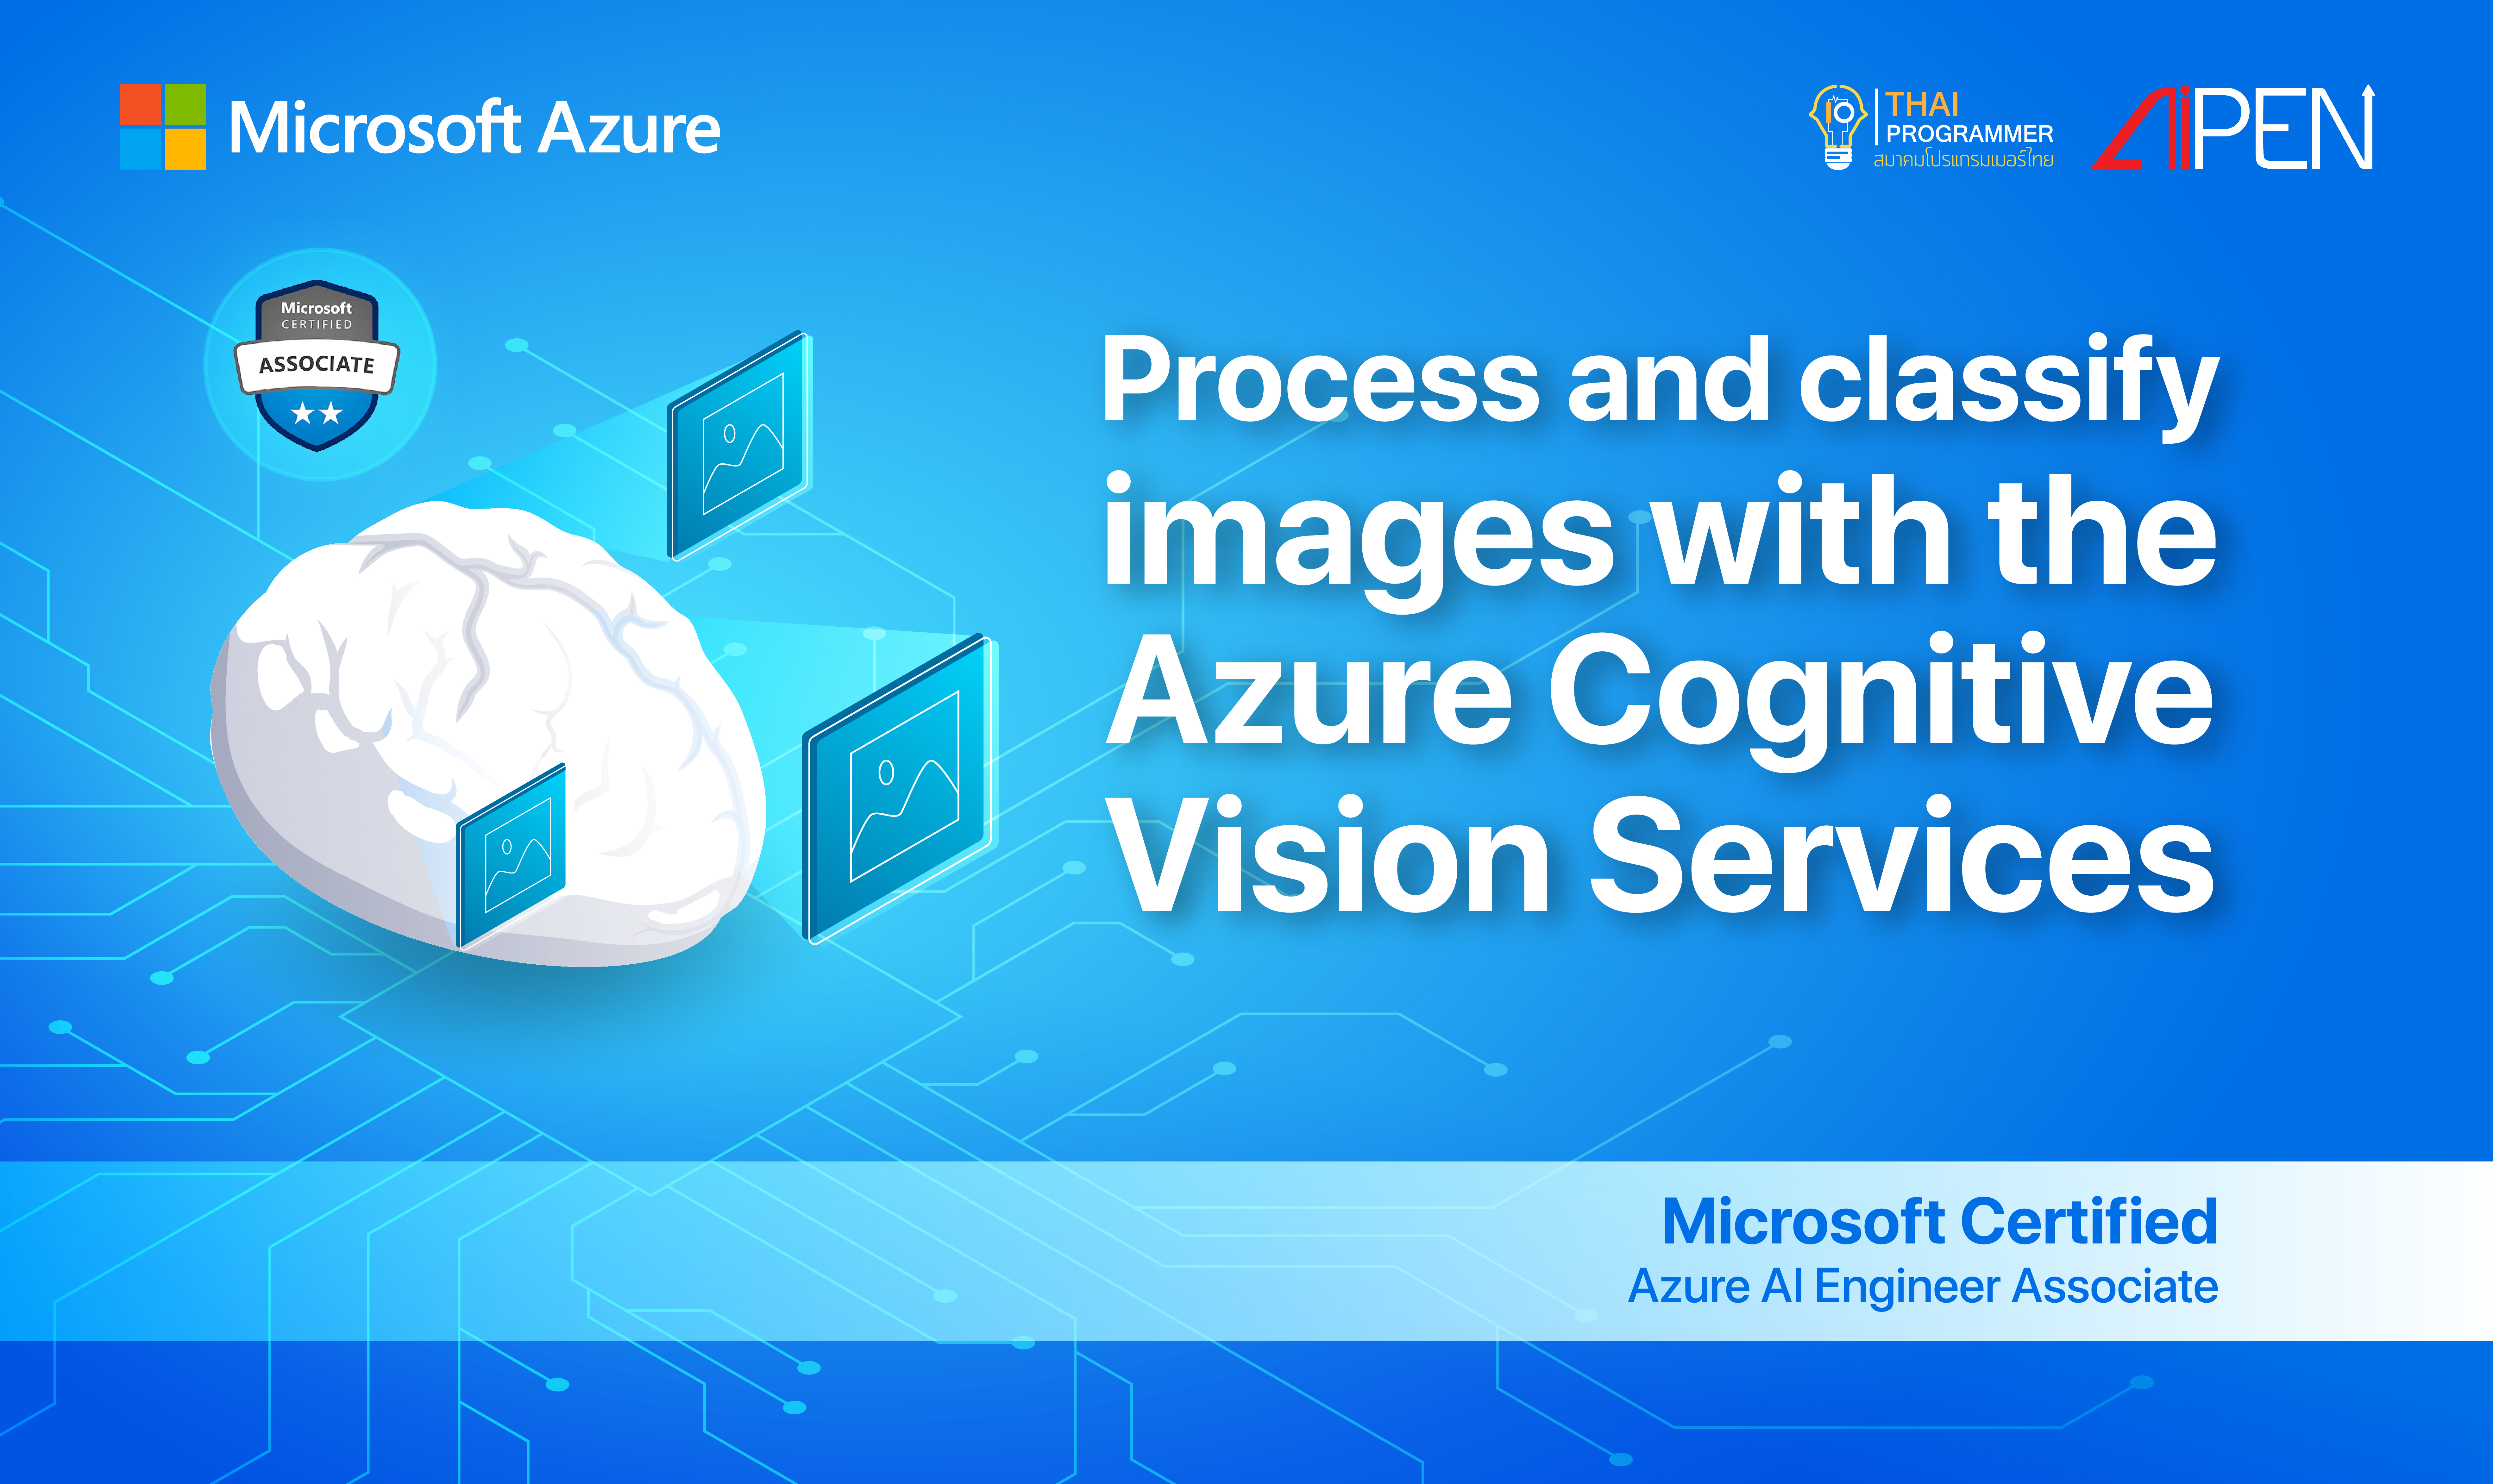 Microsoft Azure : Process and classify images with the Azure Cognitive Vision Services